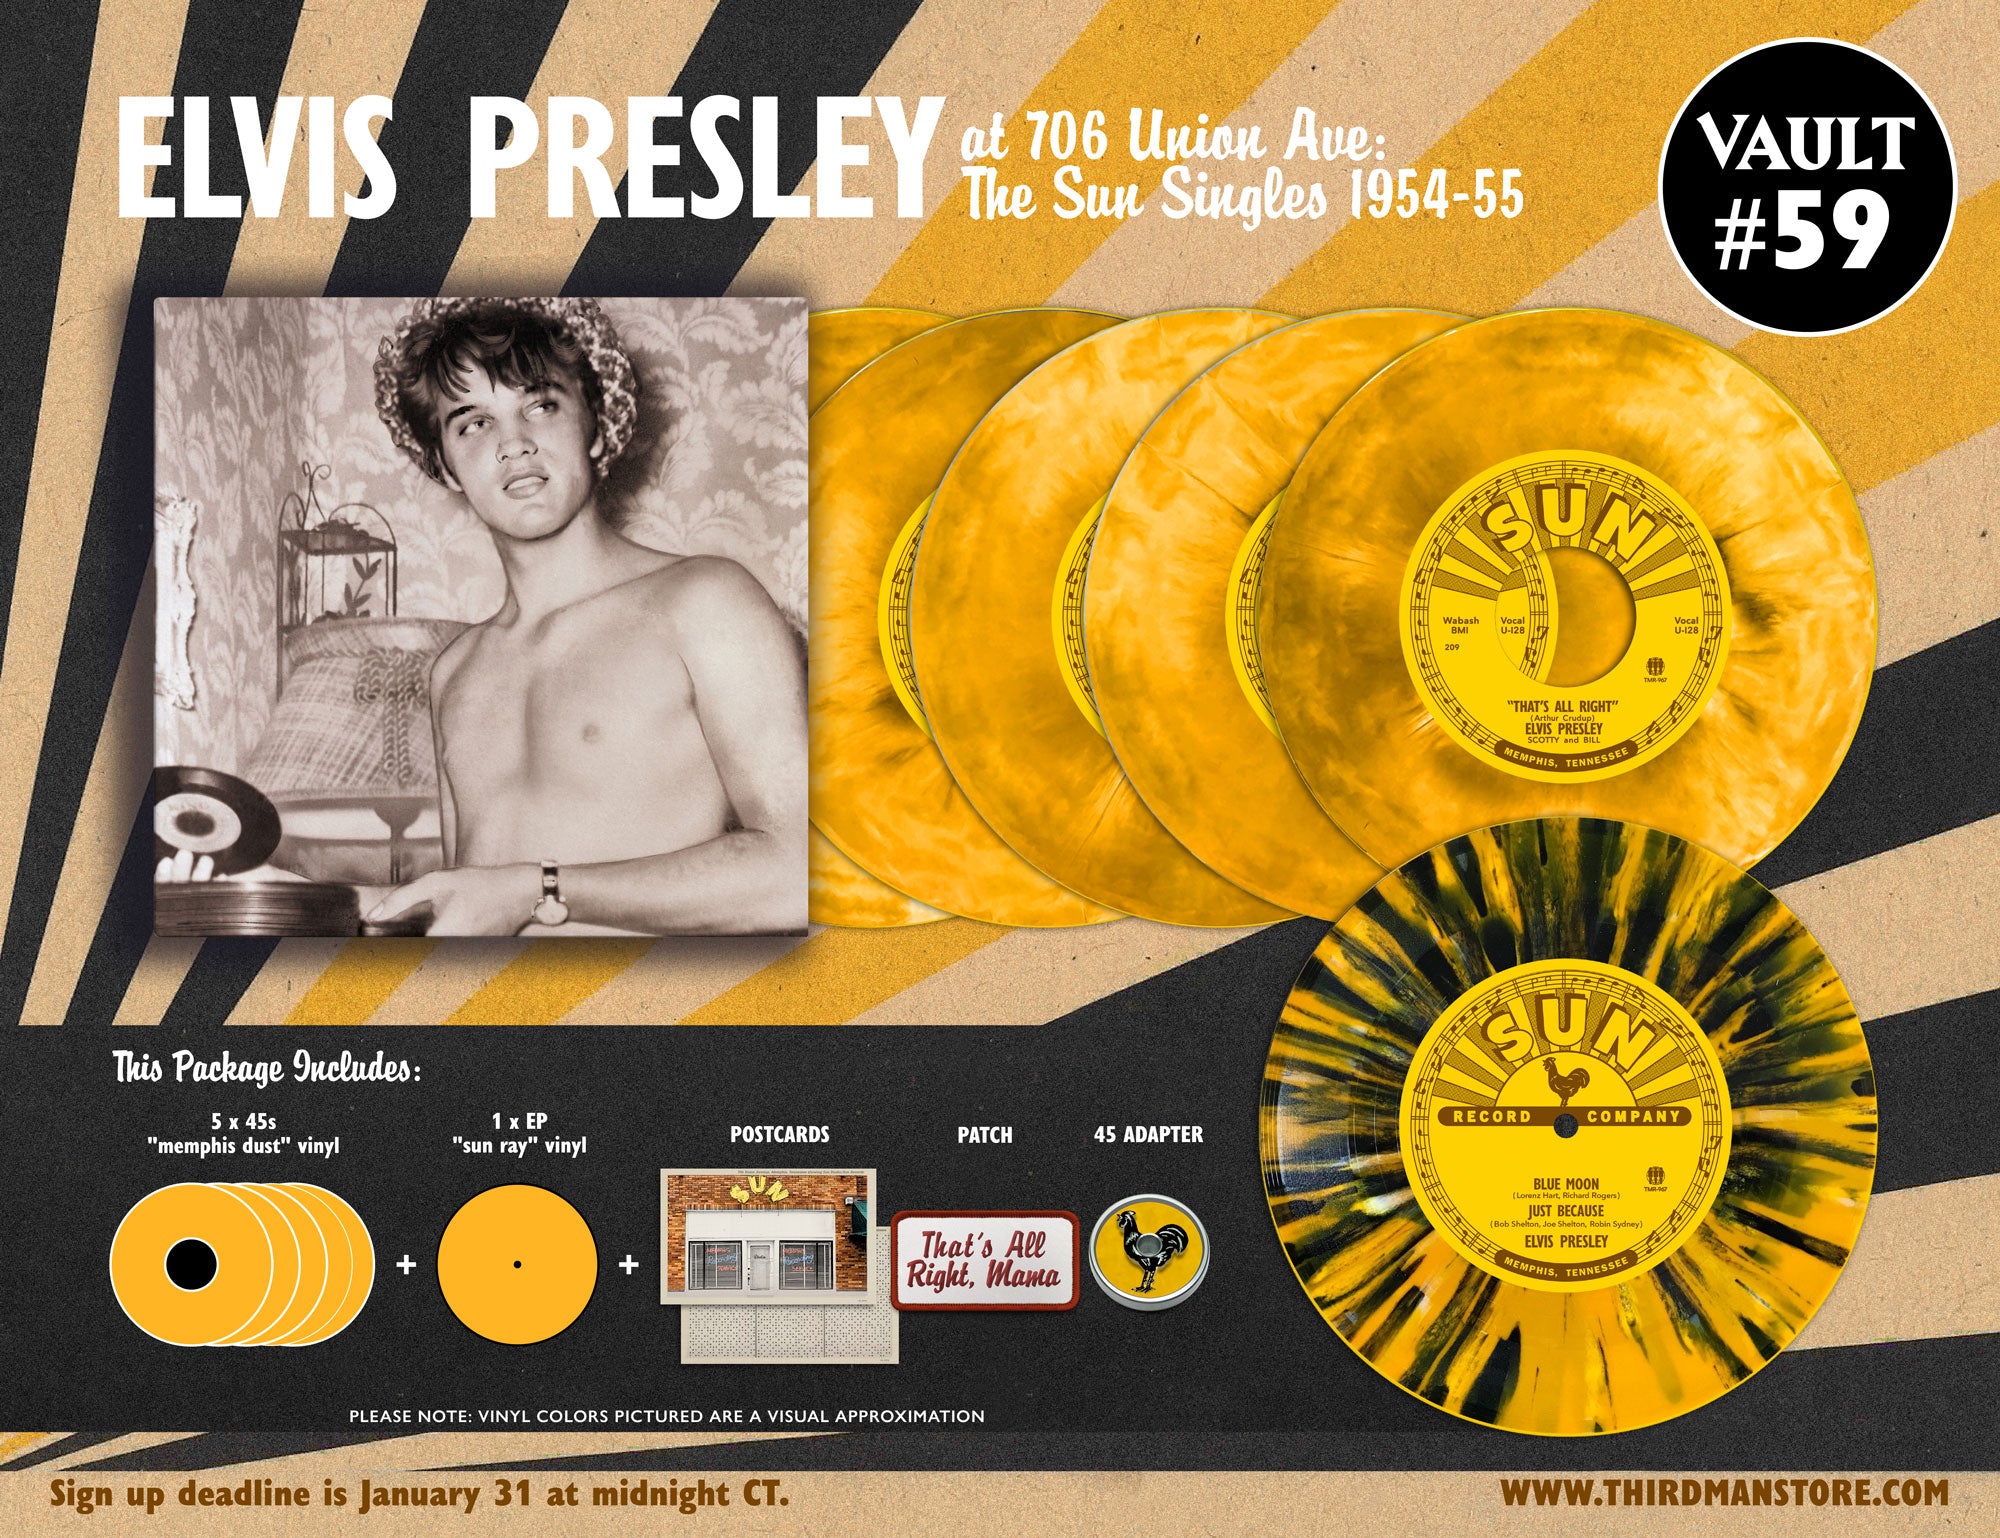 THIRD MAN RECORDS ANNOUNCES VAULT PACKAGE #59: ELVIS PRESLEY AT 